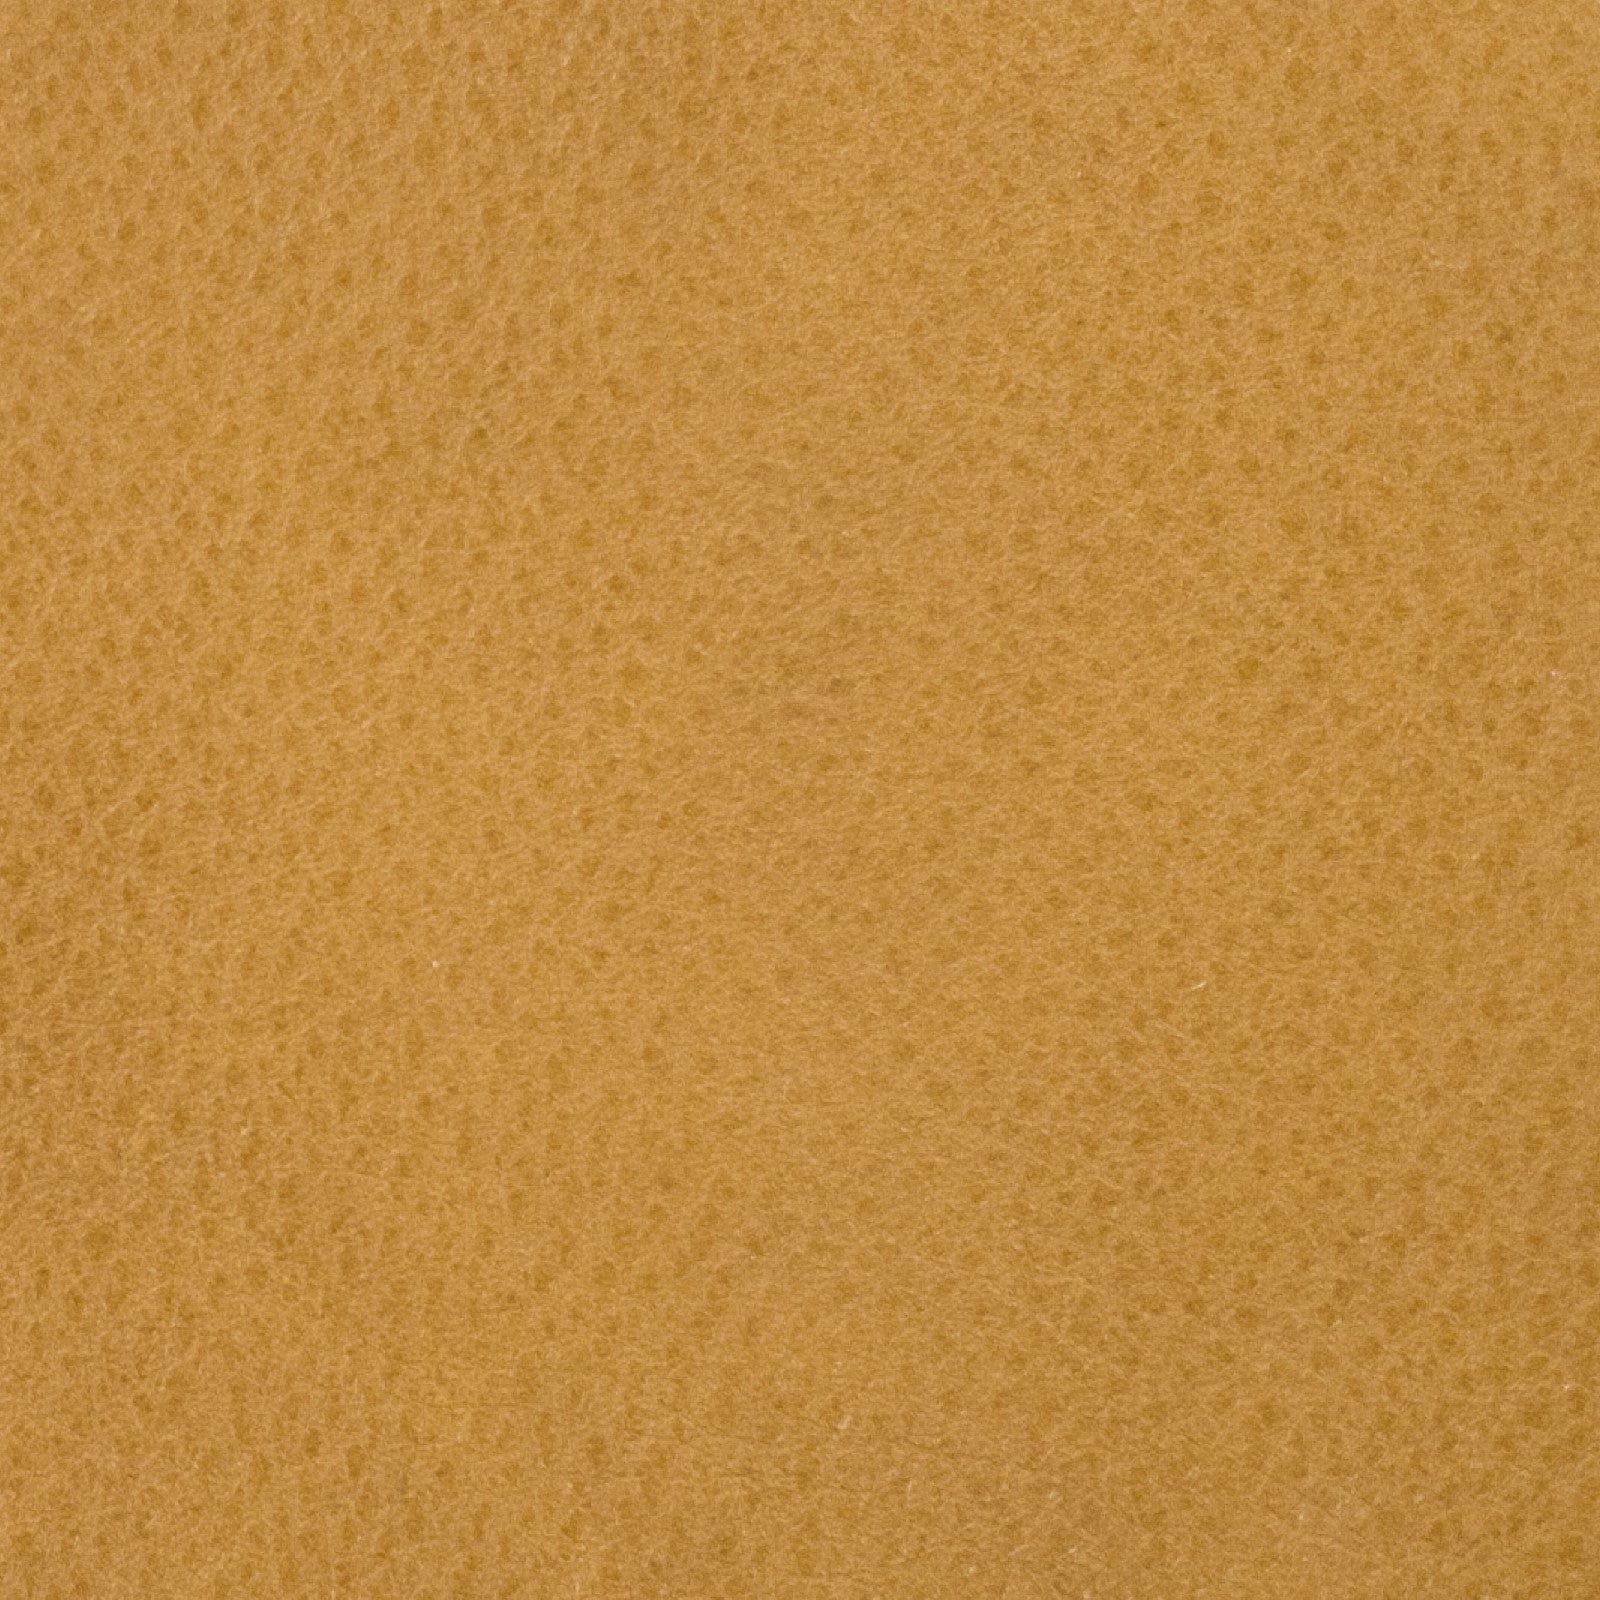 Shenandoah Collection 48-55 SF Full Hide Variation, Rocky Mountain Light Brown | The Leather Guy